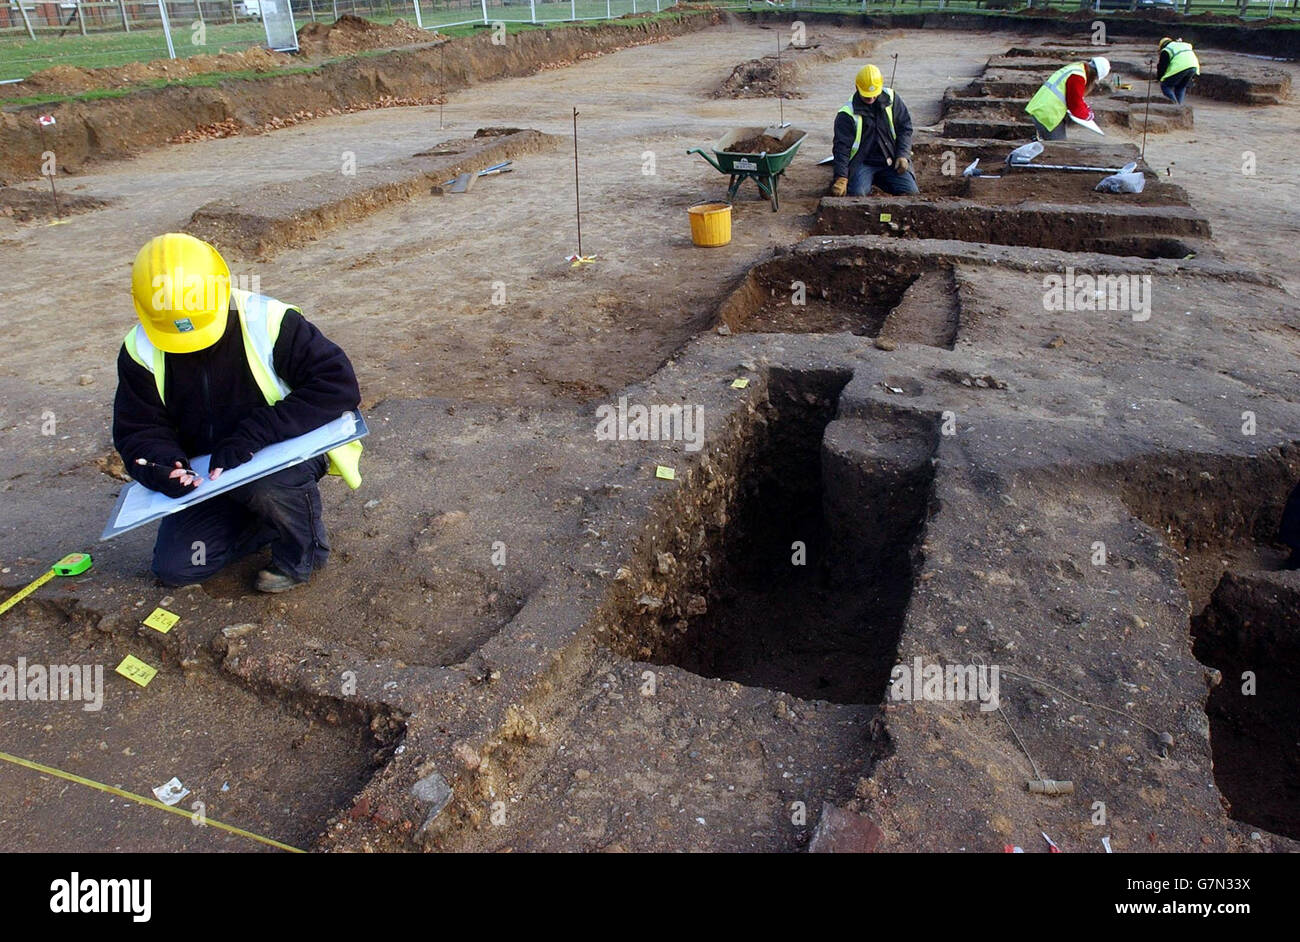 Archaeologists work on a building site where excavation works for a new housing development have unearthed elements of a walled structure over 350m long and 70m wide thought to represent a Roman Chariot racing arena or Roman Circus and is the only verified example of a circus in Britain. Stock Photo